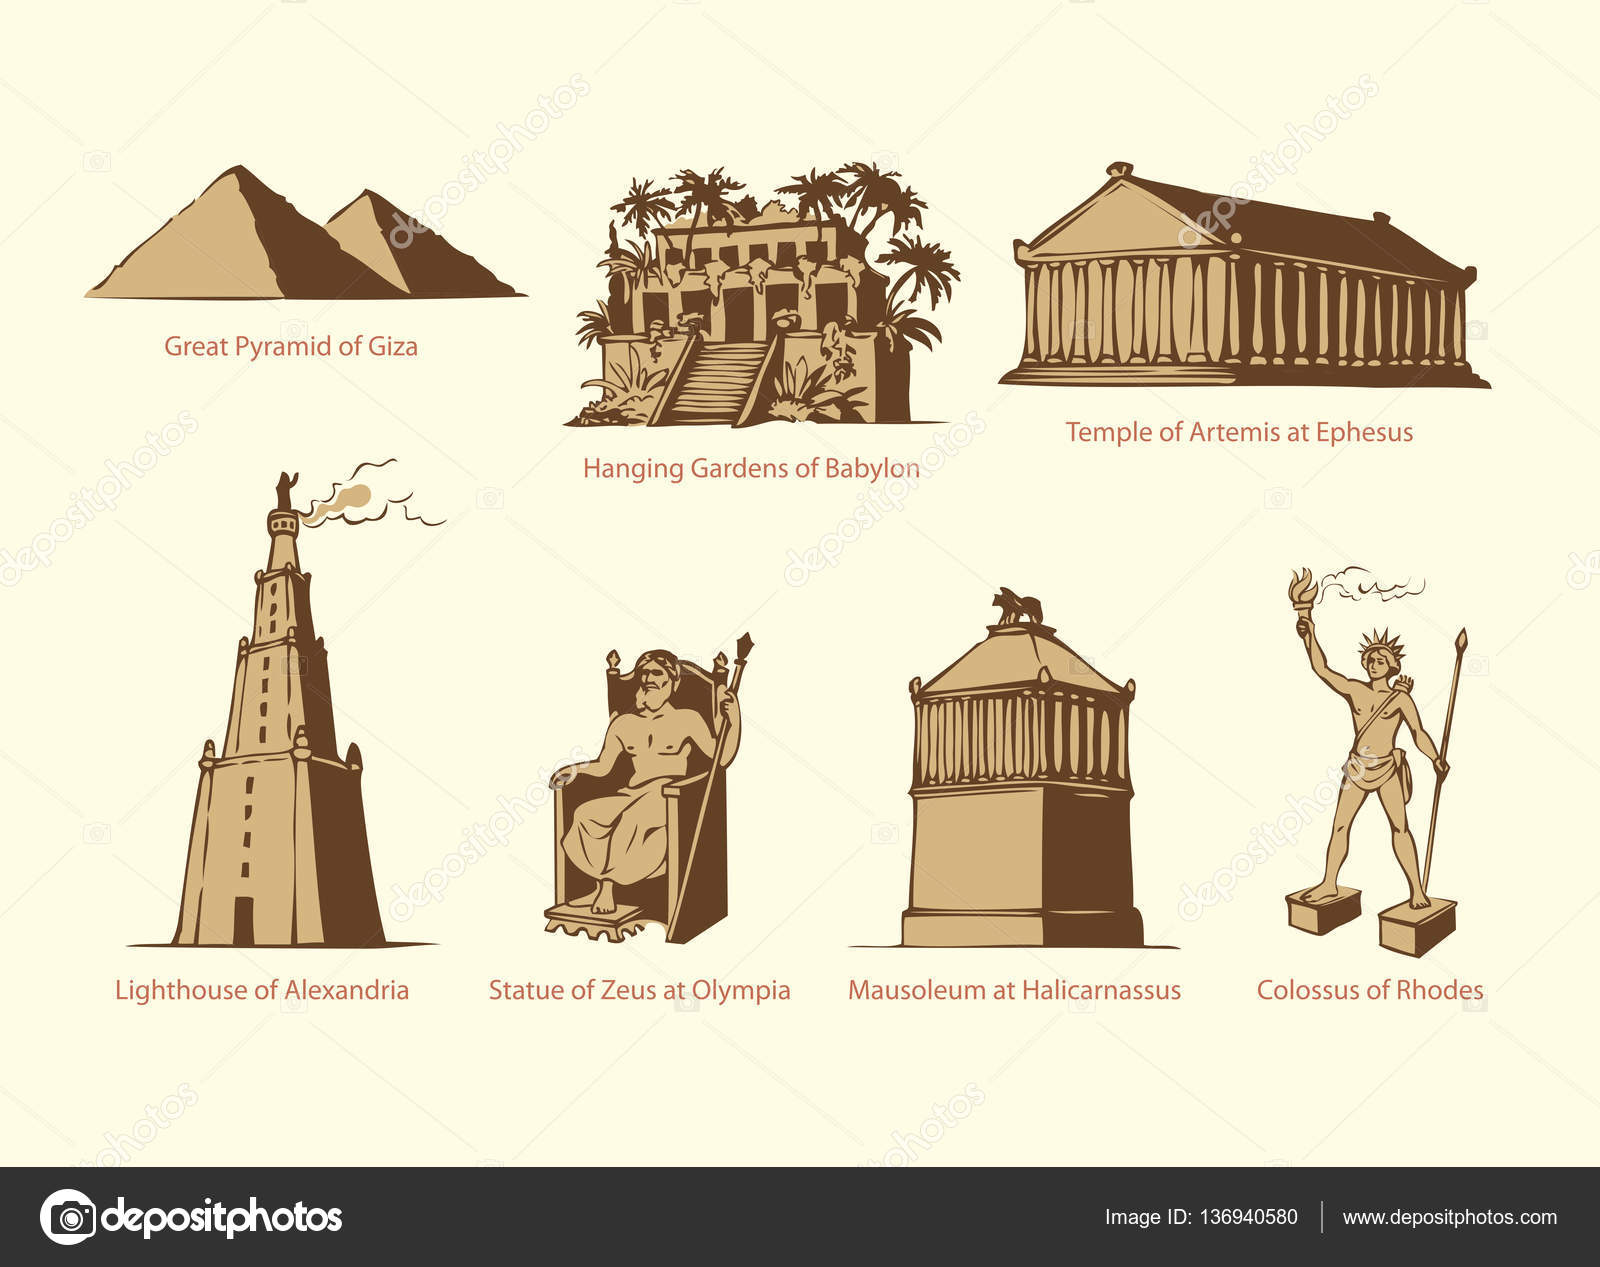 images-ancient-7-wonders-of-the-world-vector-symbols-of-the-seven